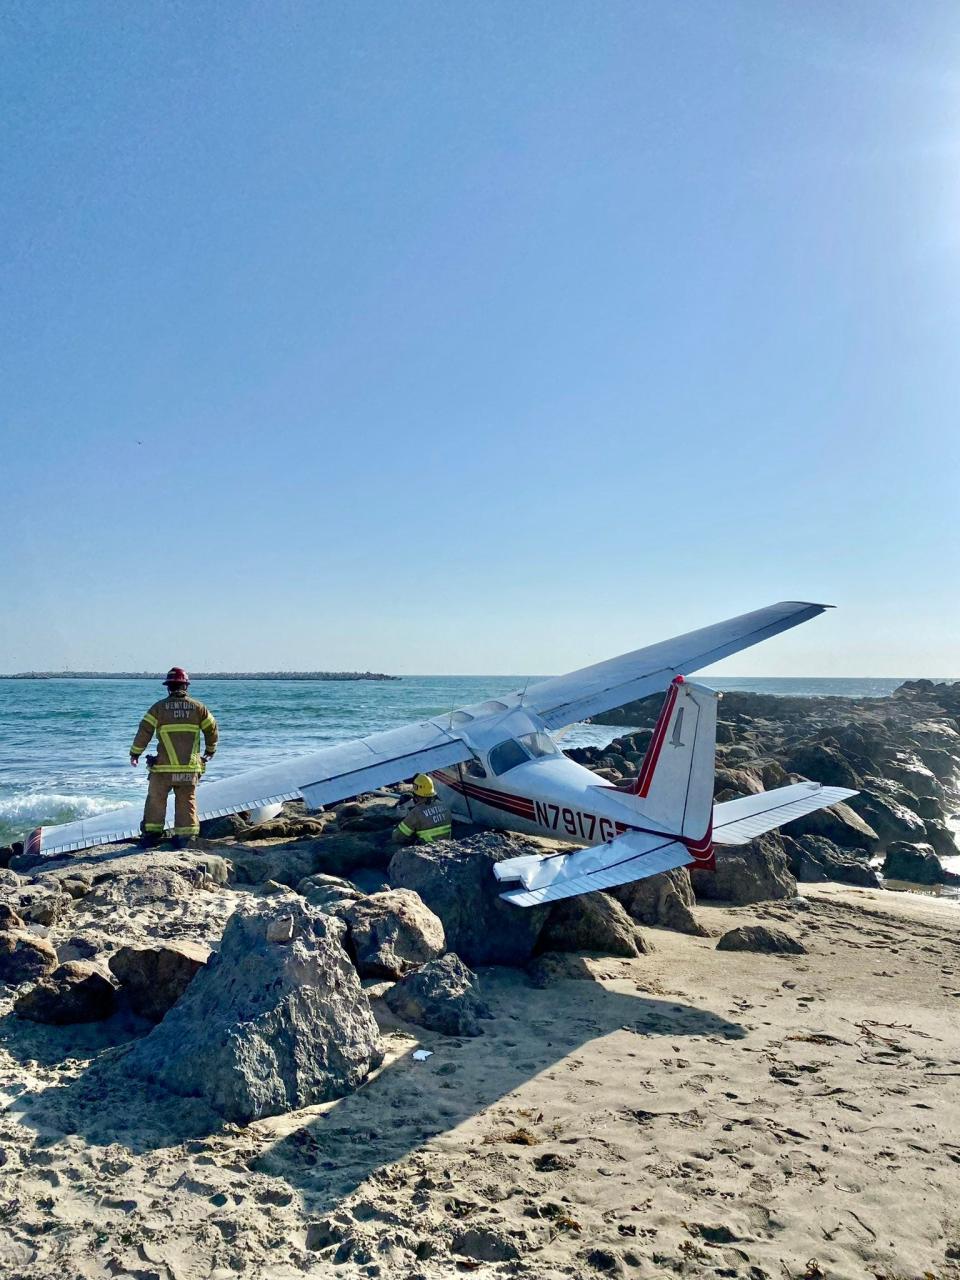 Firefighters check the scene after a single-engine Cessna landed on a rocky jetty at Ventura's Marina Beach Friday afternoon.